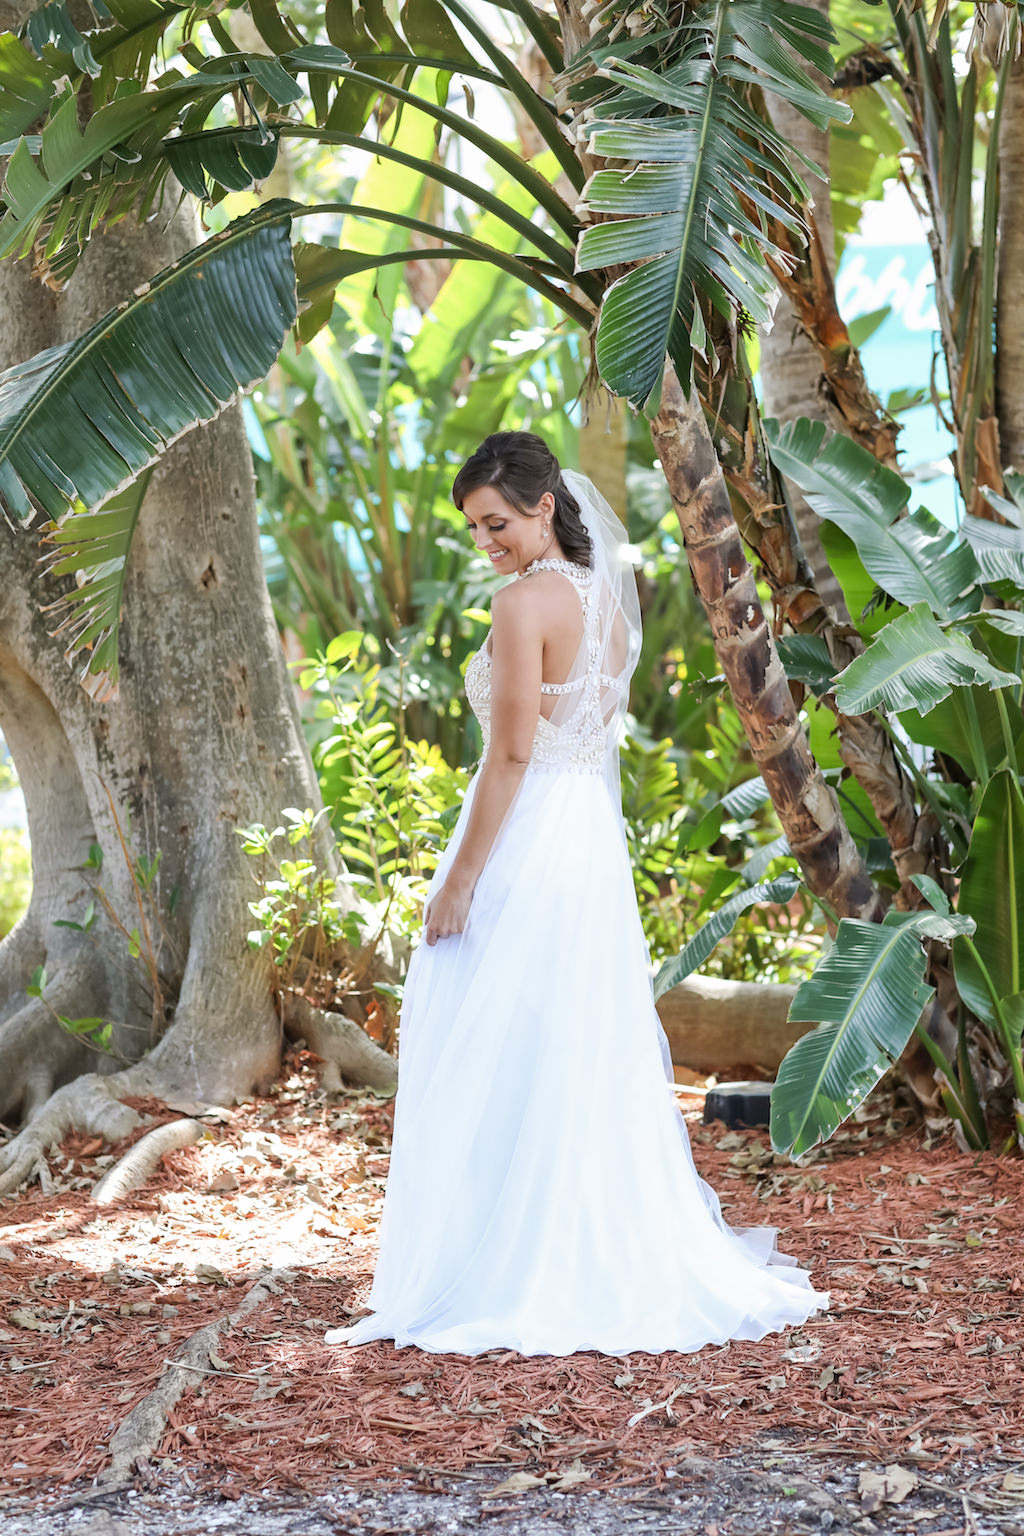 Outdoor Bridal Portrait A-Line Scoop Neck Nude Rhinestone Bodice and White Chiffon Floor Length Wedding Dress with Beaded Keyhole Back and Veil and Half Up Hairdo | Tampa Bay Wedding Photographer Lifelong Photography Studios | Tampa Bay Wedding Hair and Makeup Michele Renee the Studio